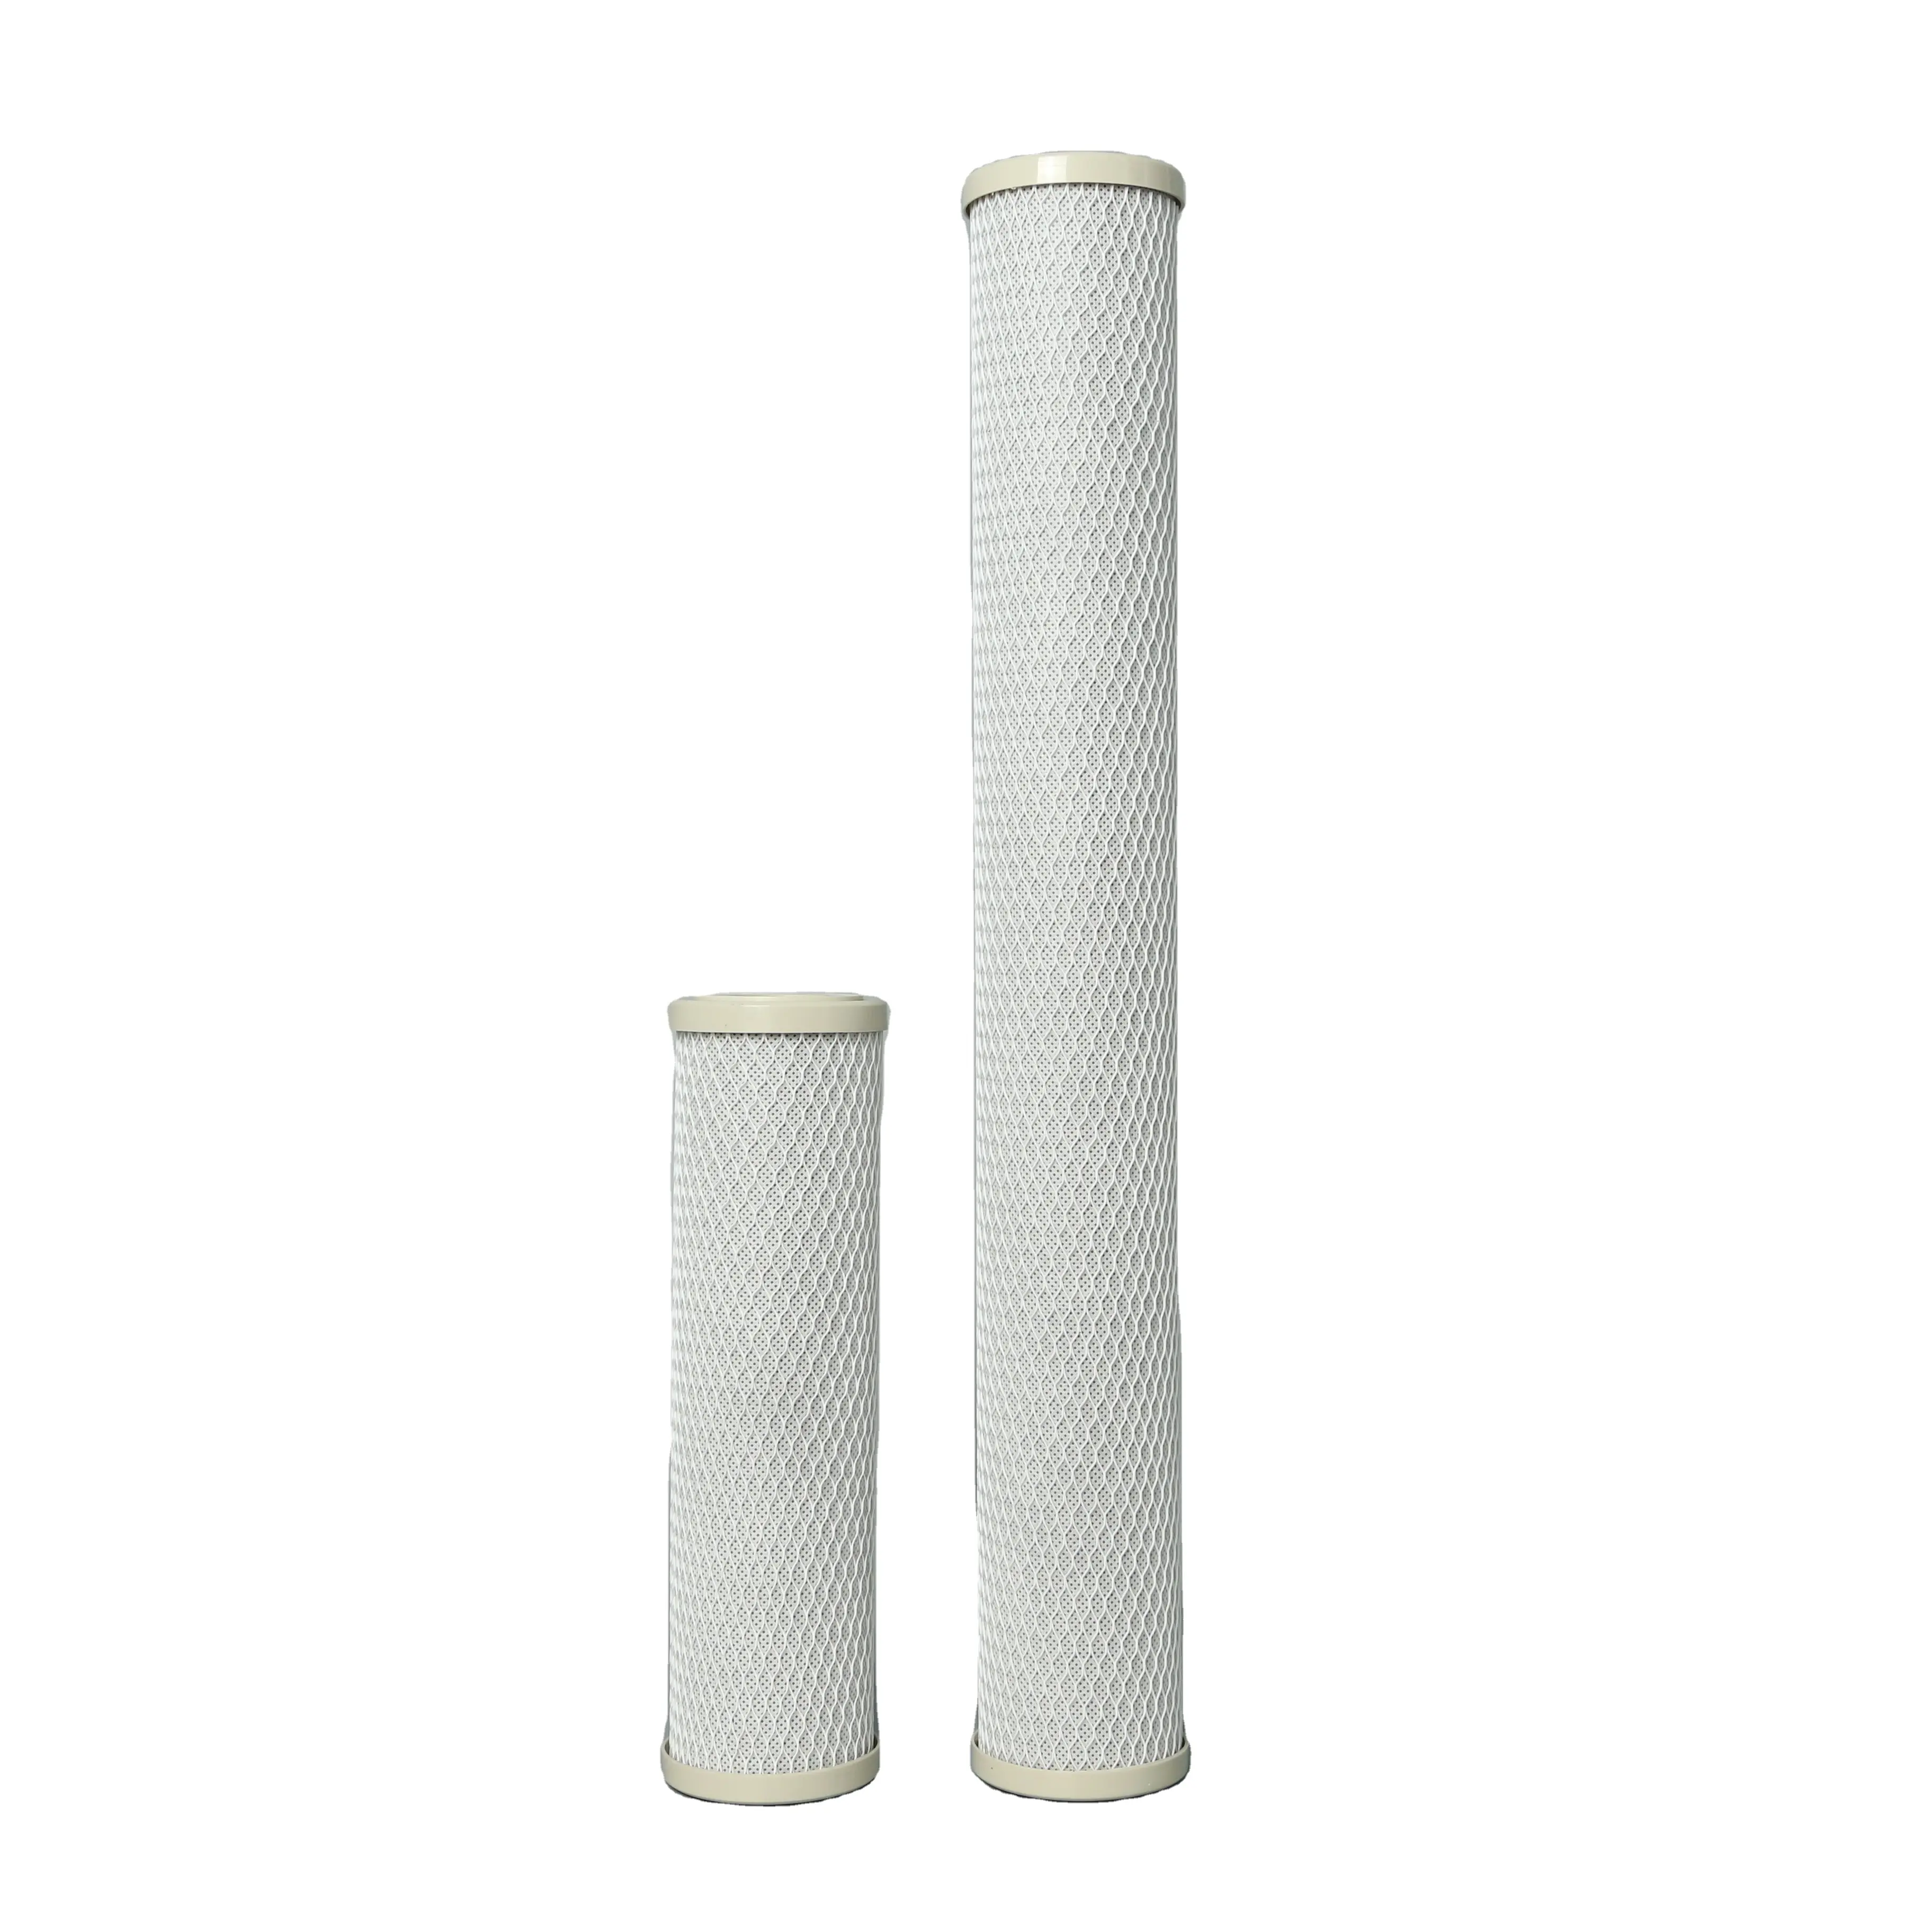 Water filter or purifiers machine filter cartridge with GAC and CTO and PP